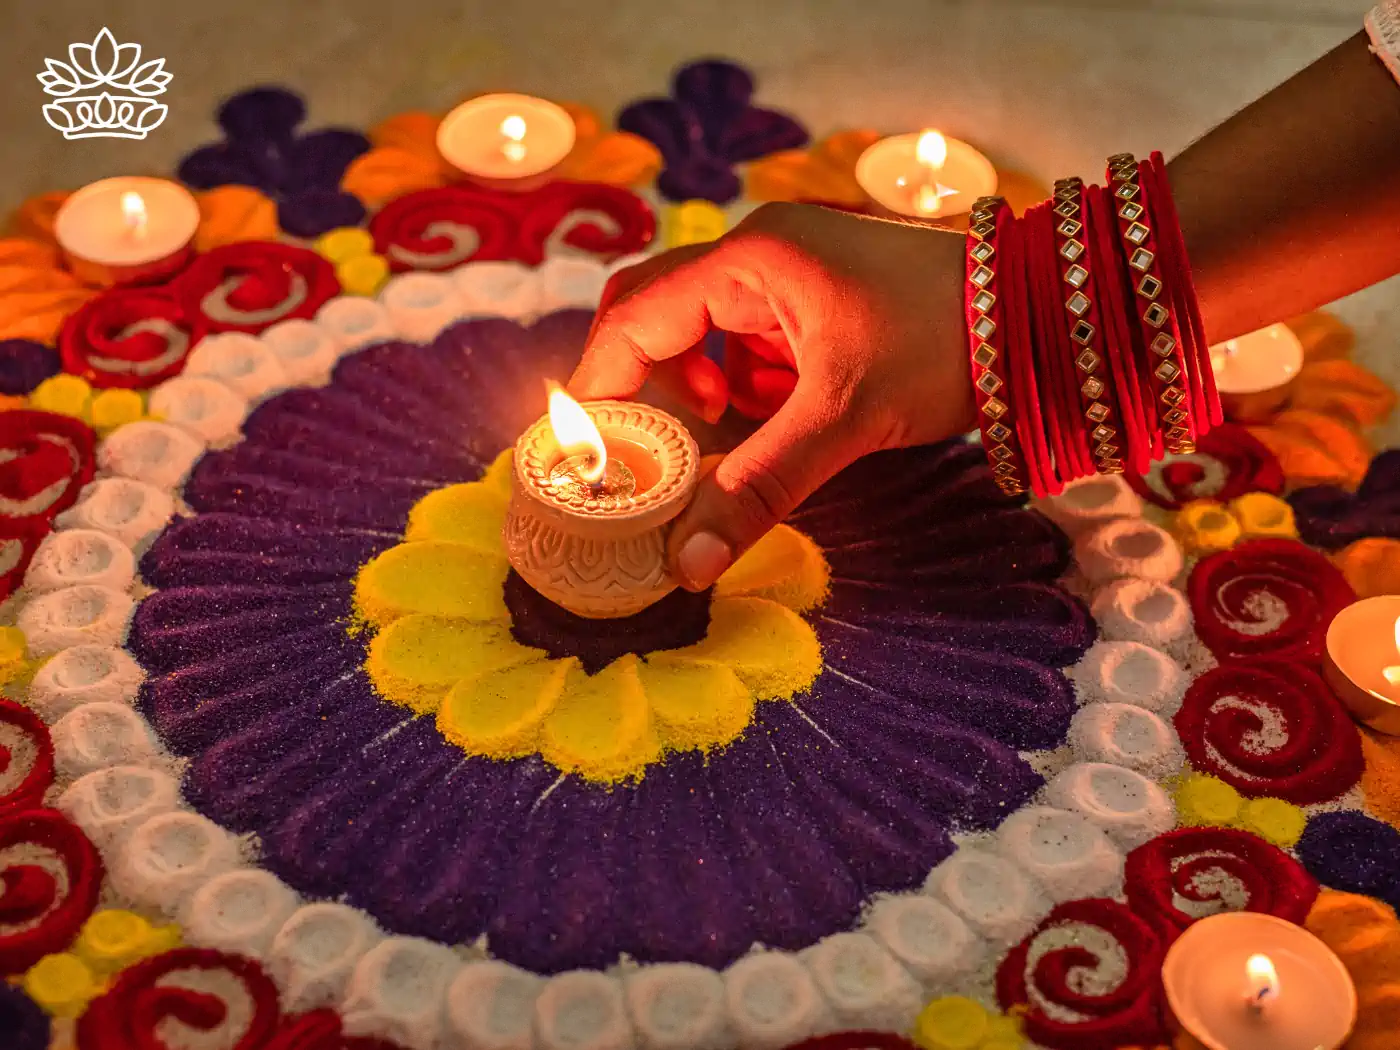 A person lighting a traditional clay Diwali lamp on a vibrant rangoli decorated with colorful flower patterns and candles, symbolising the festival of lights. Fabulous Flowers and Gifts - Diwali Flowers. Hindus celebrate this sepcial day.